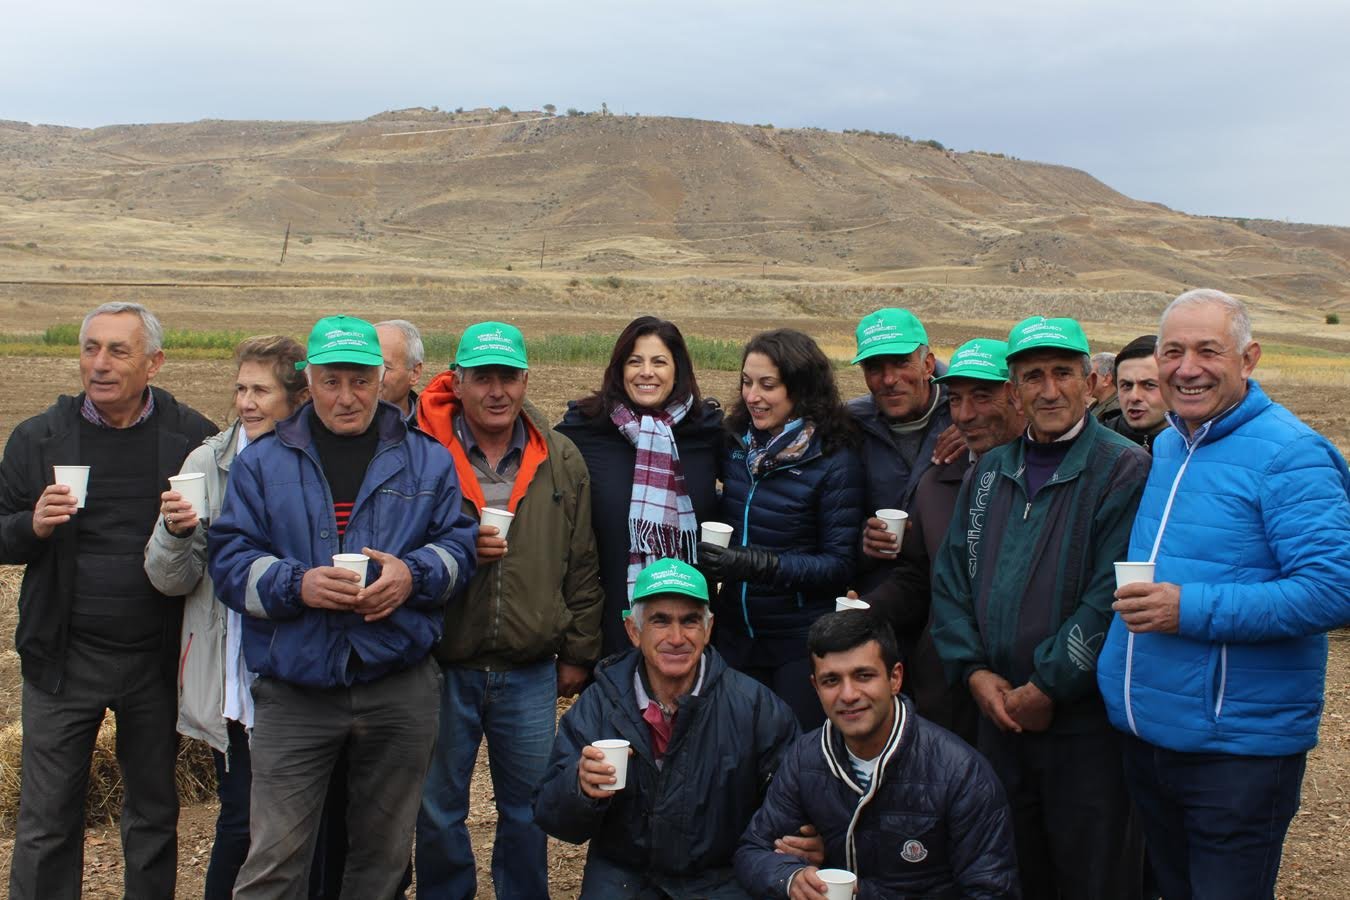 ATP’s leadership joined guests in the southern wine region of Vayots Dzor to break ground on its fourth tree nursery; several Chiva Nursery workers are pictured with founder Carolyn Mugar, executive committee member Julia Mirak Kew, executive director Jeanmarie Papelian, and nursery managers Samvel Ghandilyan and Tigran Palazyan